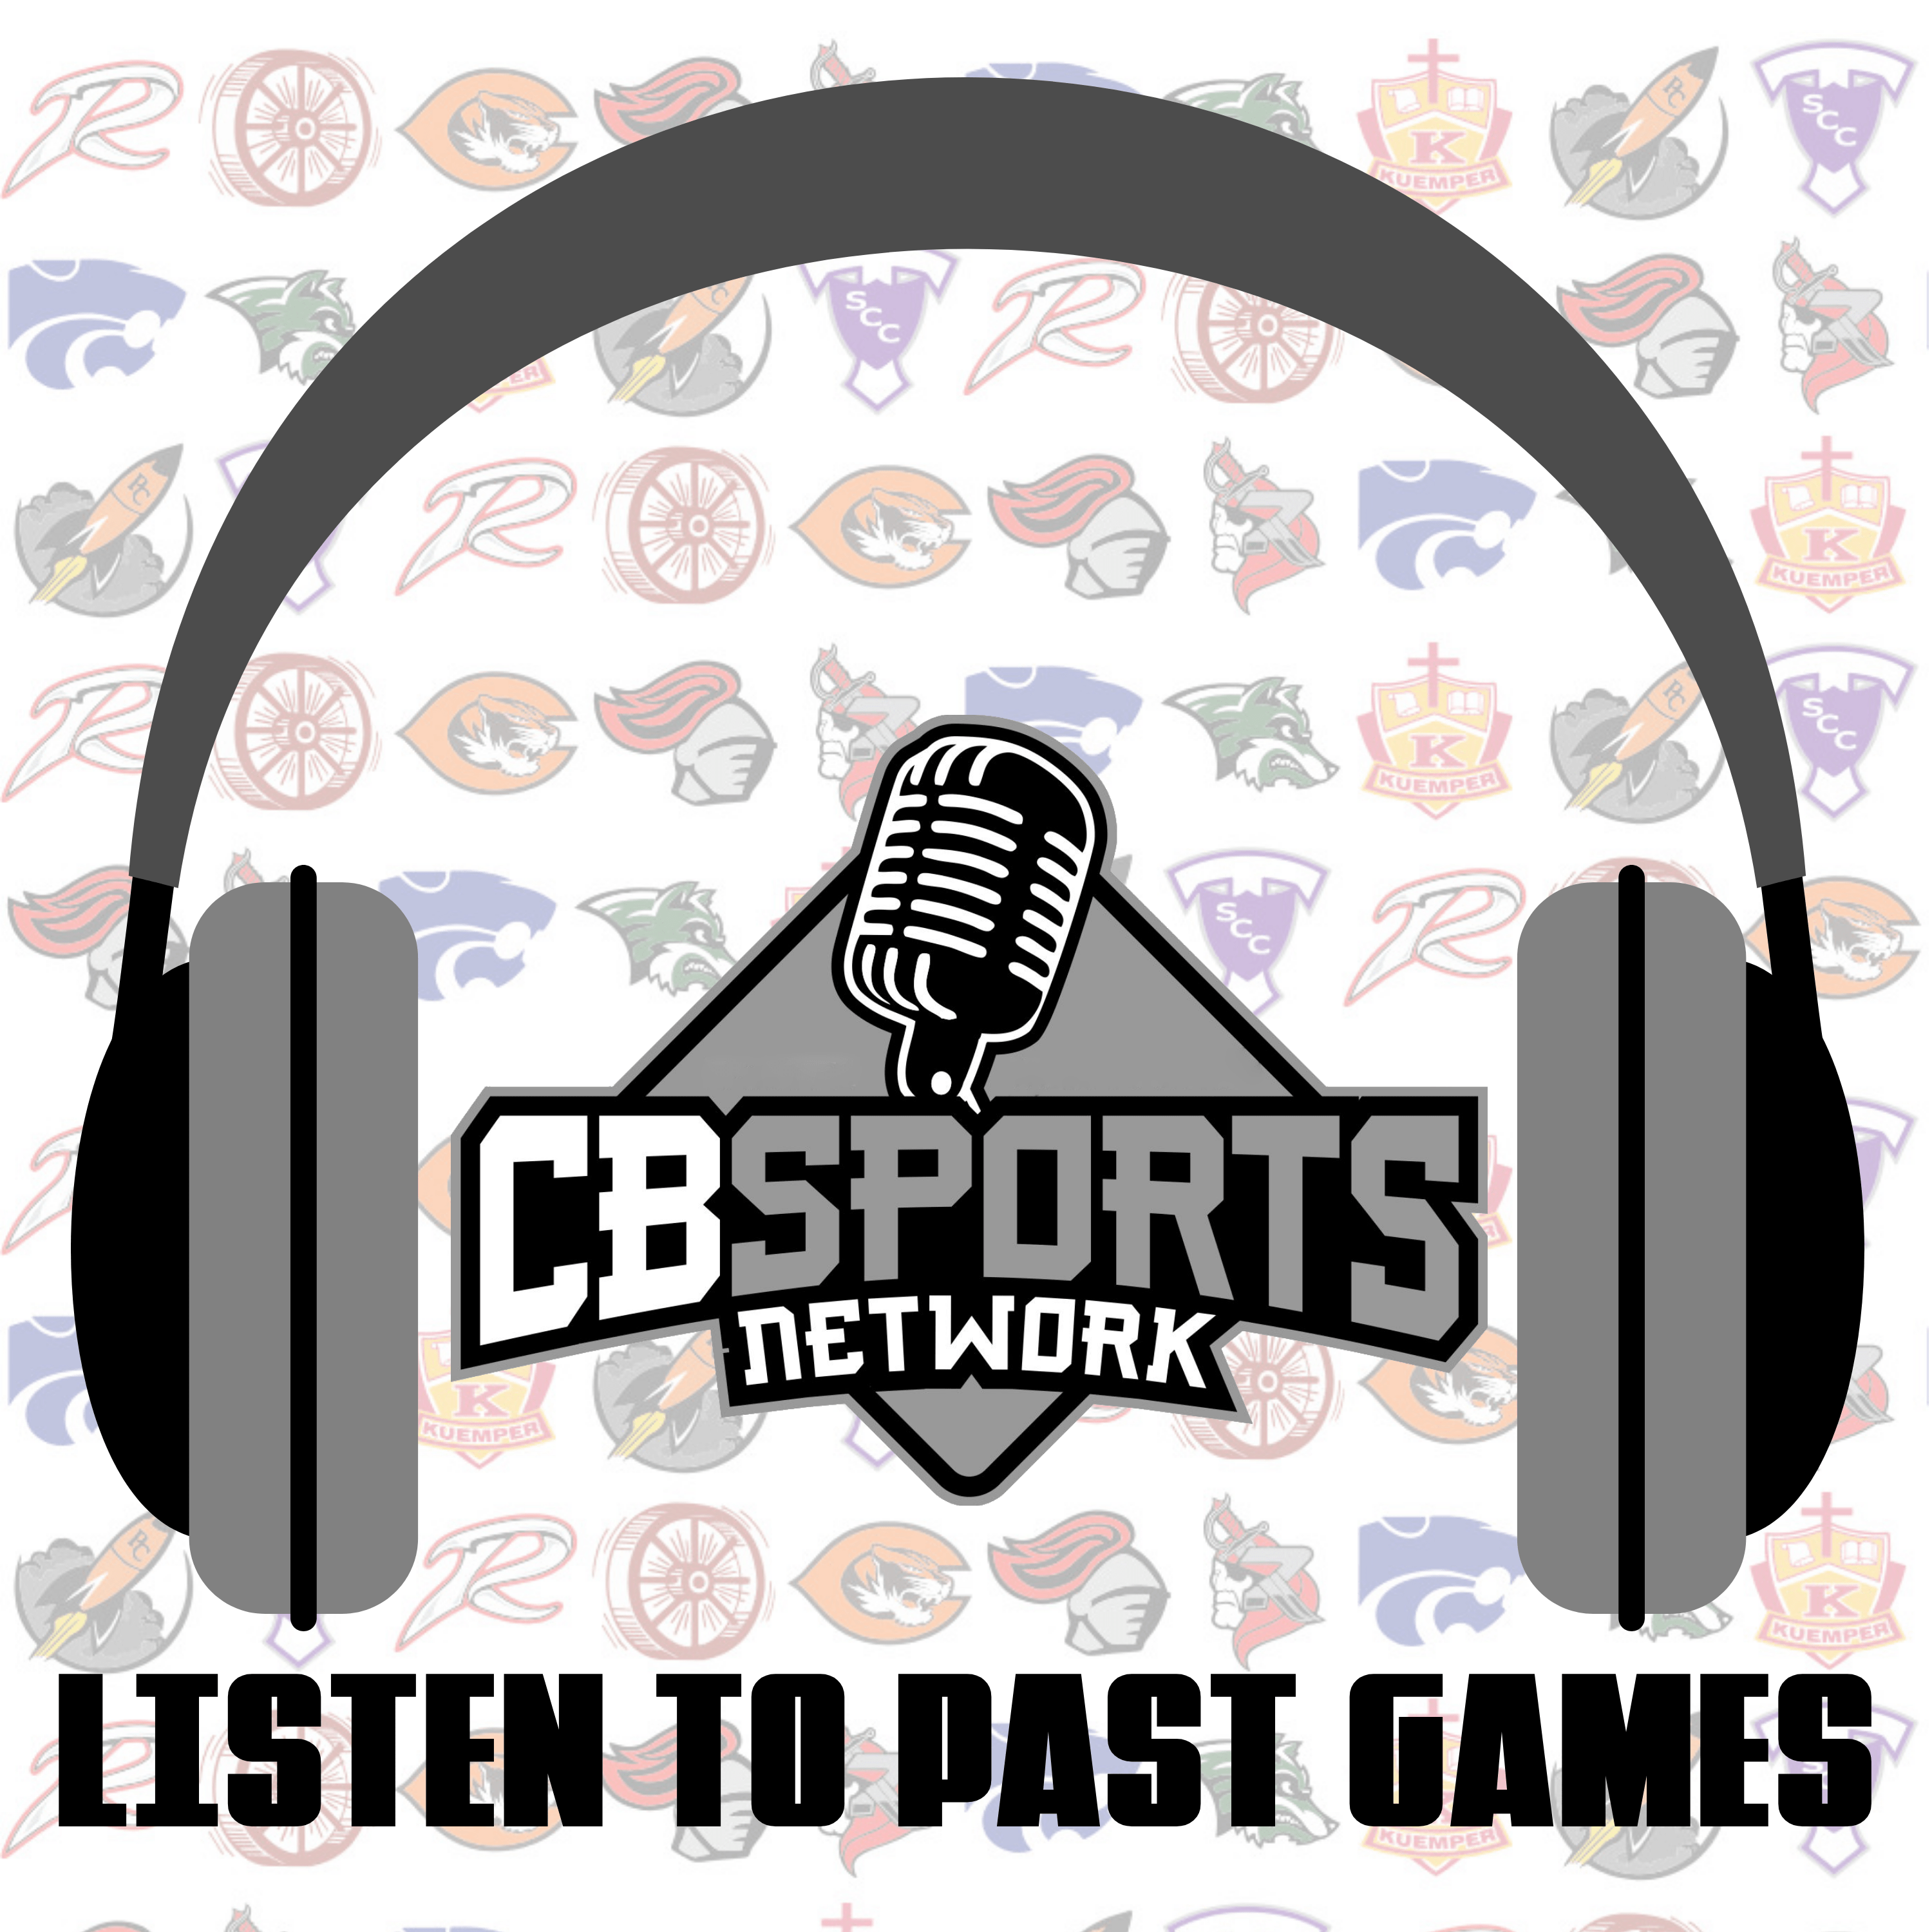 Listen to Past Games